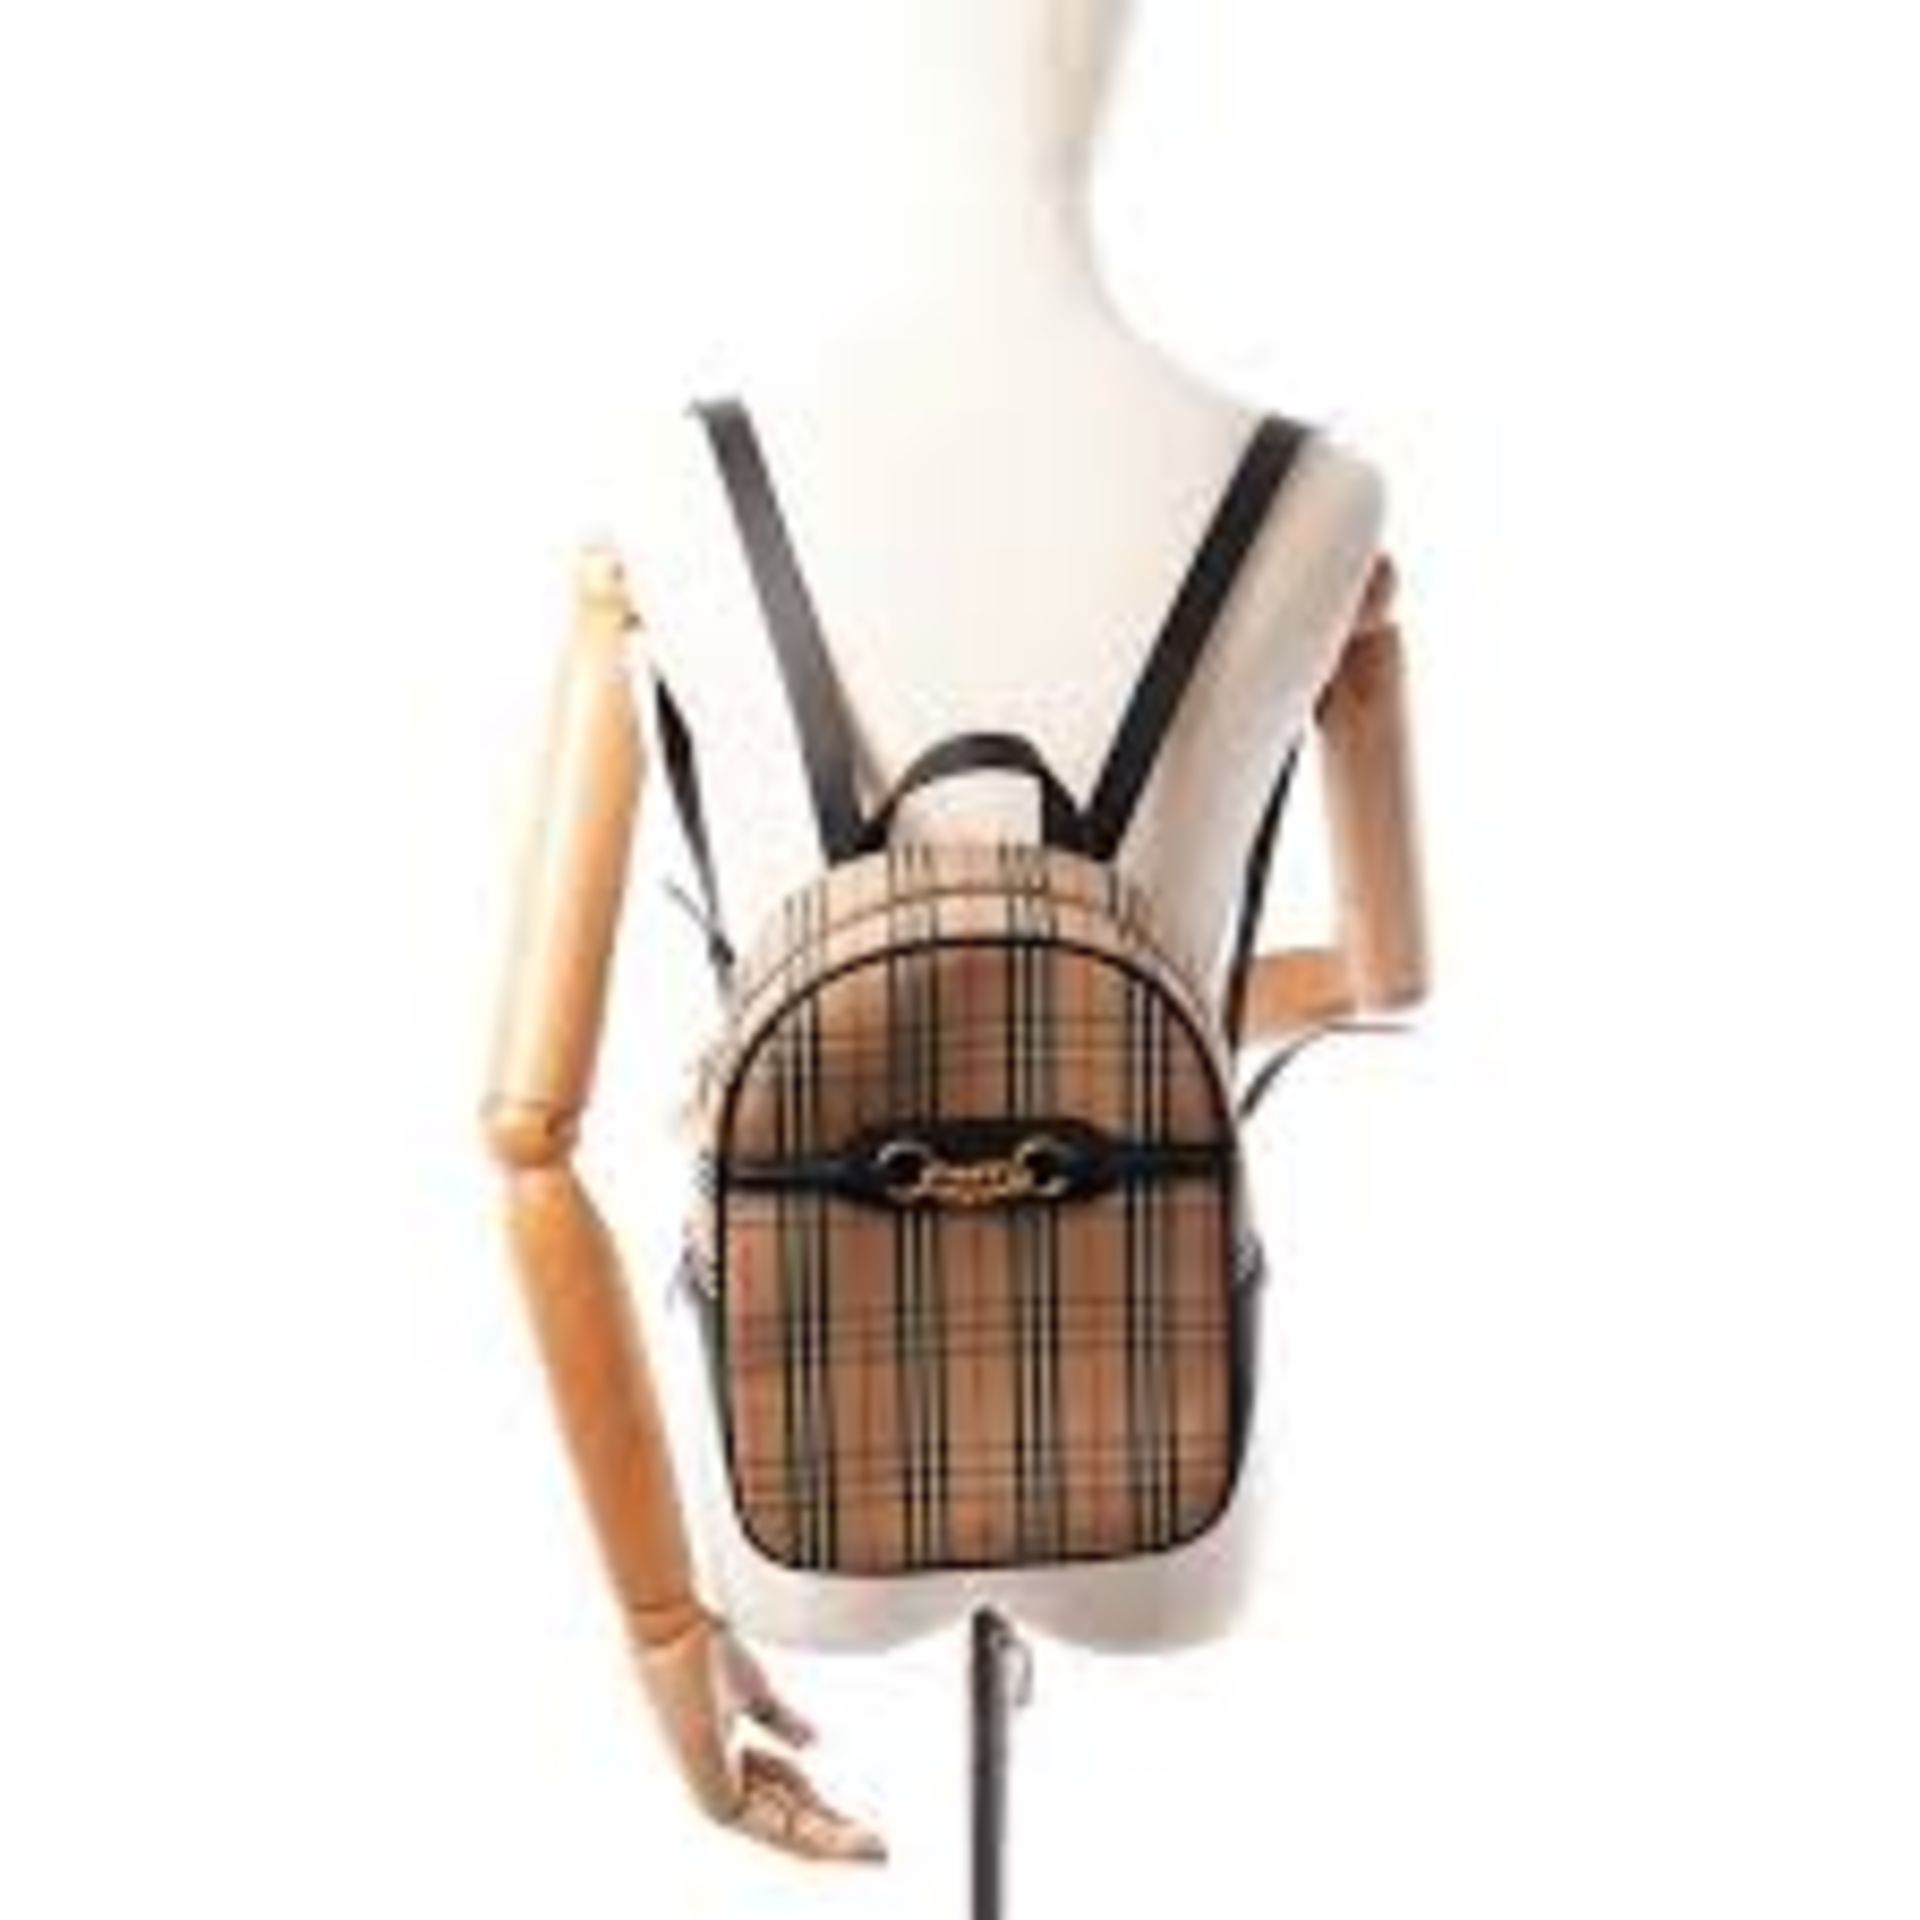 Burberry Link Backpack in Nova Check. 20x25cm. - Image 4 of 10